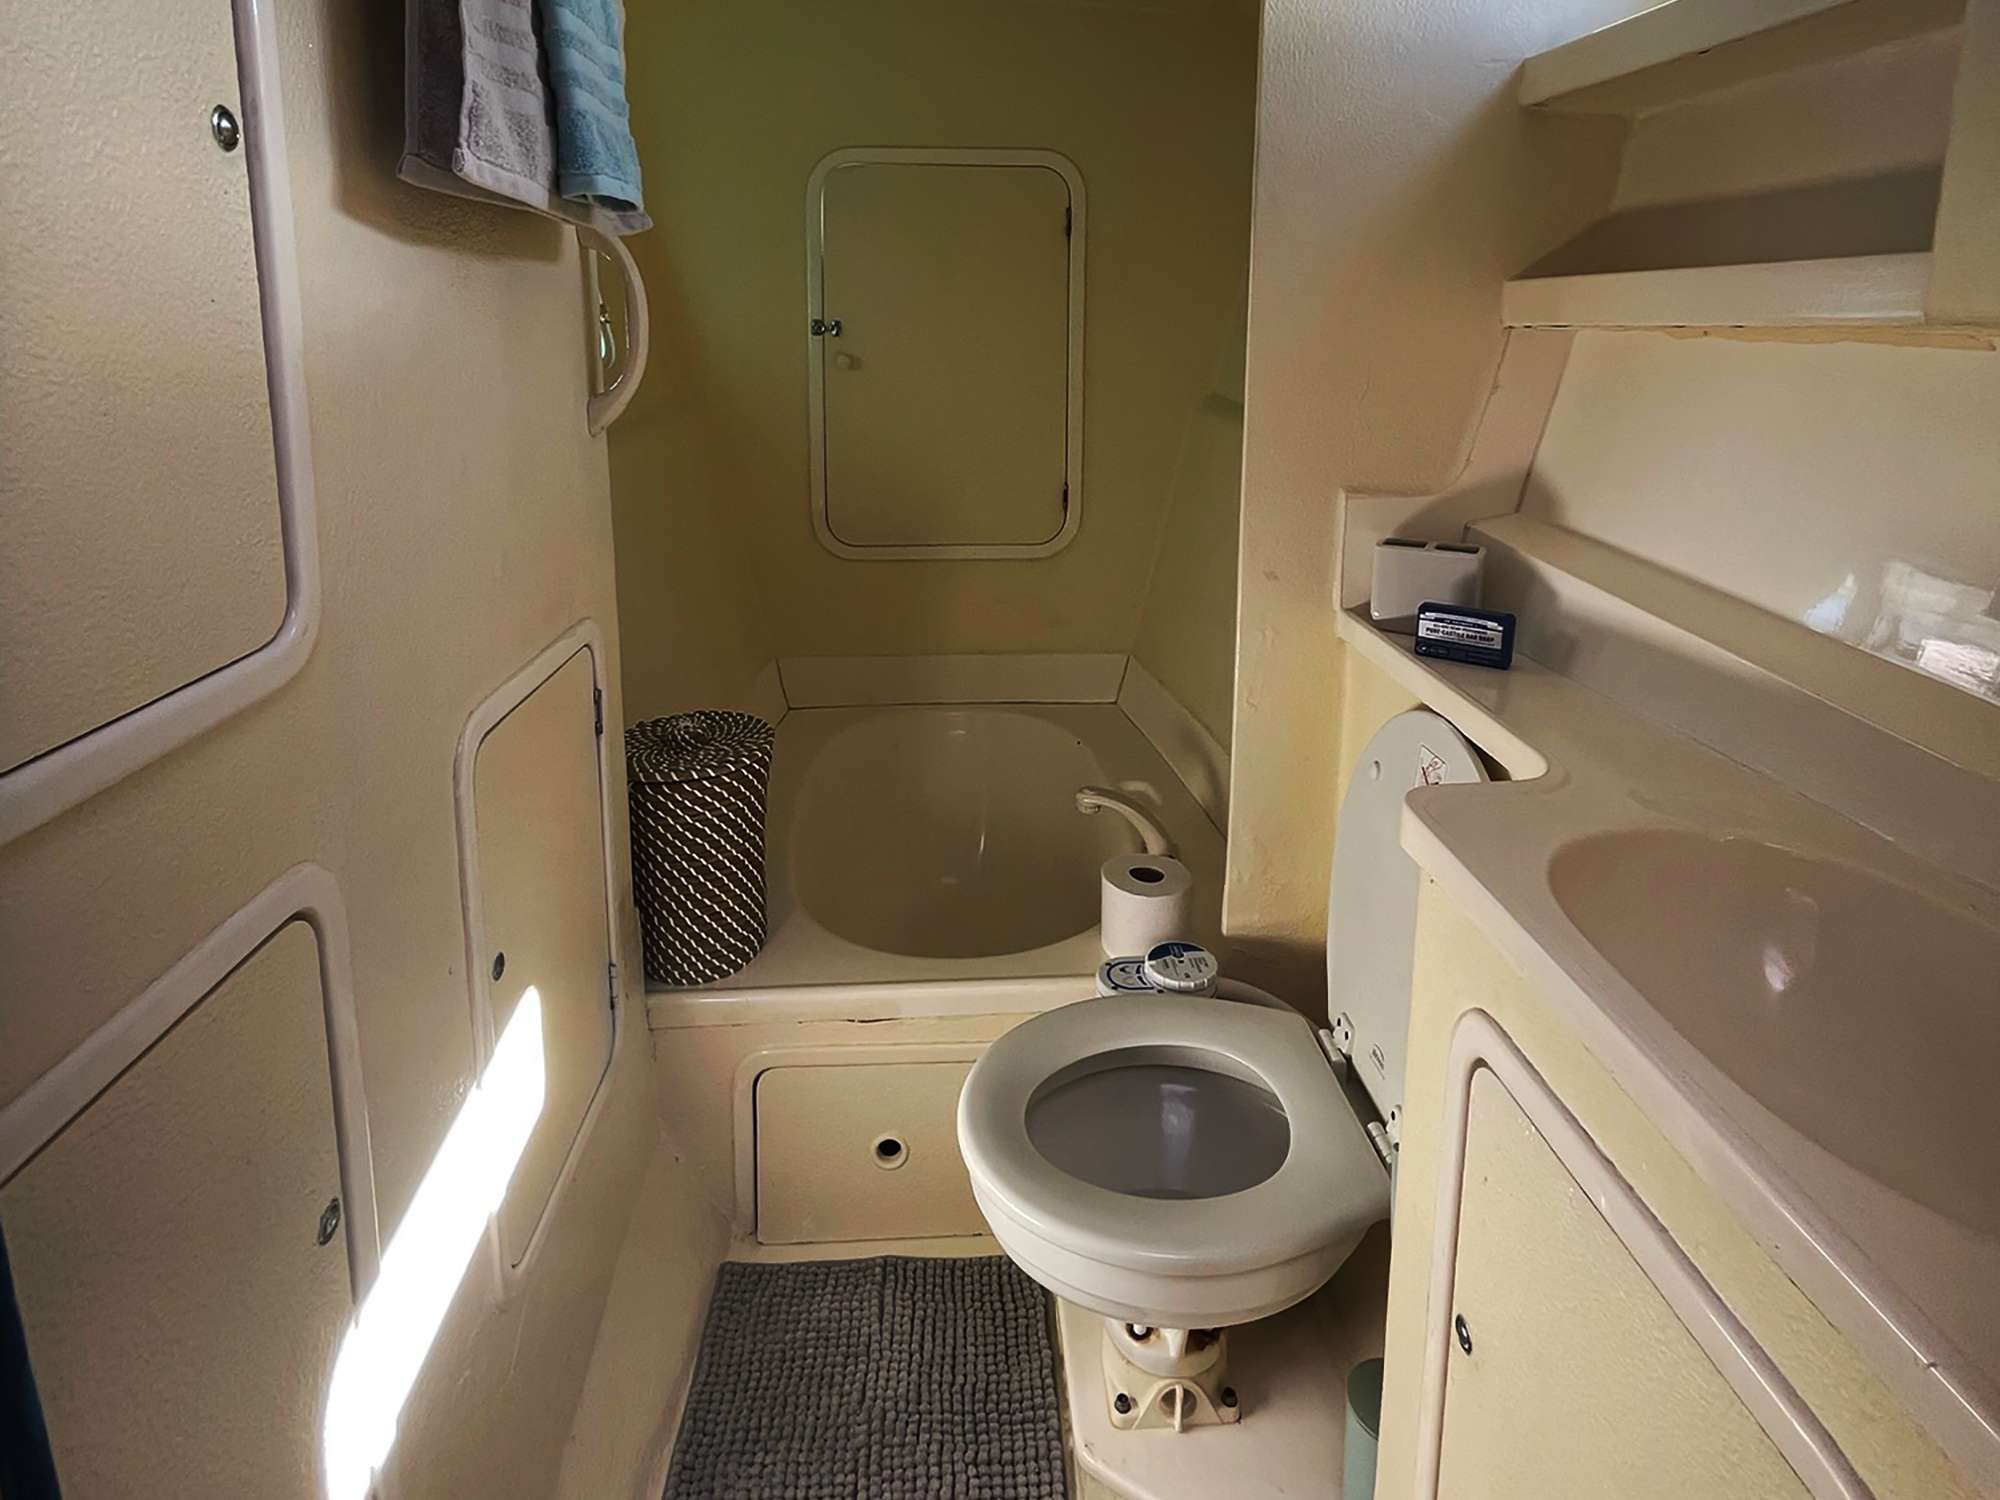 RUBICON Yacht Charter - Primary Bathrooms both with tub &amp; shower.  Additional interior photos of Rubicon are featured on the Guest Comments page